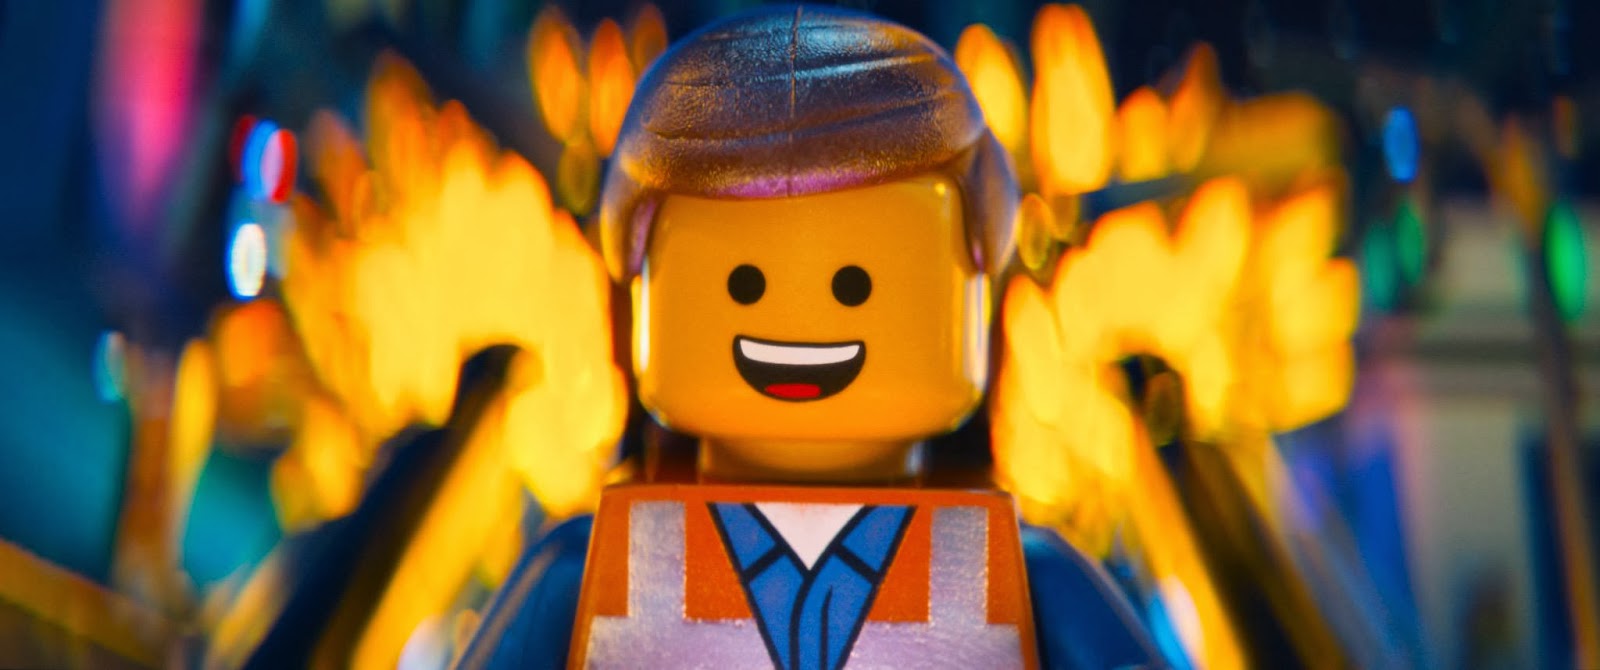 The Lego Movie' Has Been Built Into Something Awesome (Movie Review)